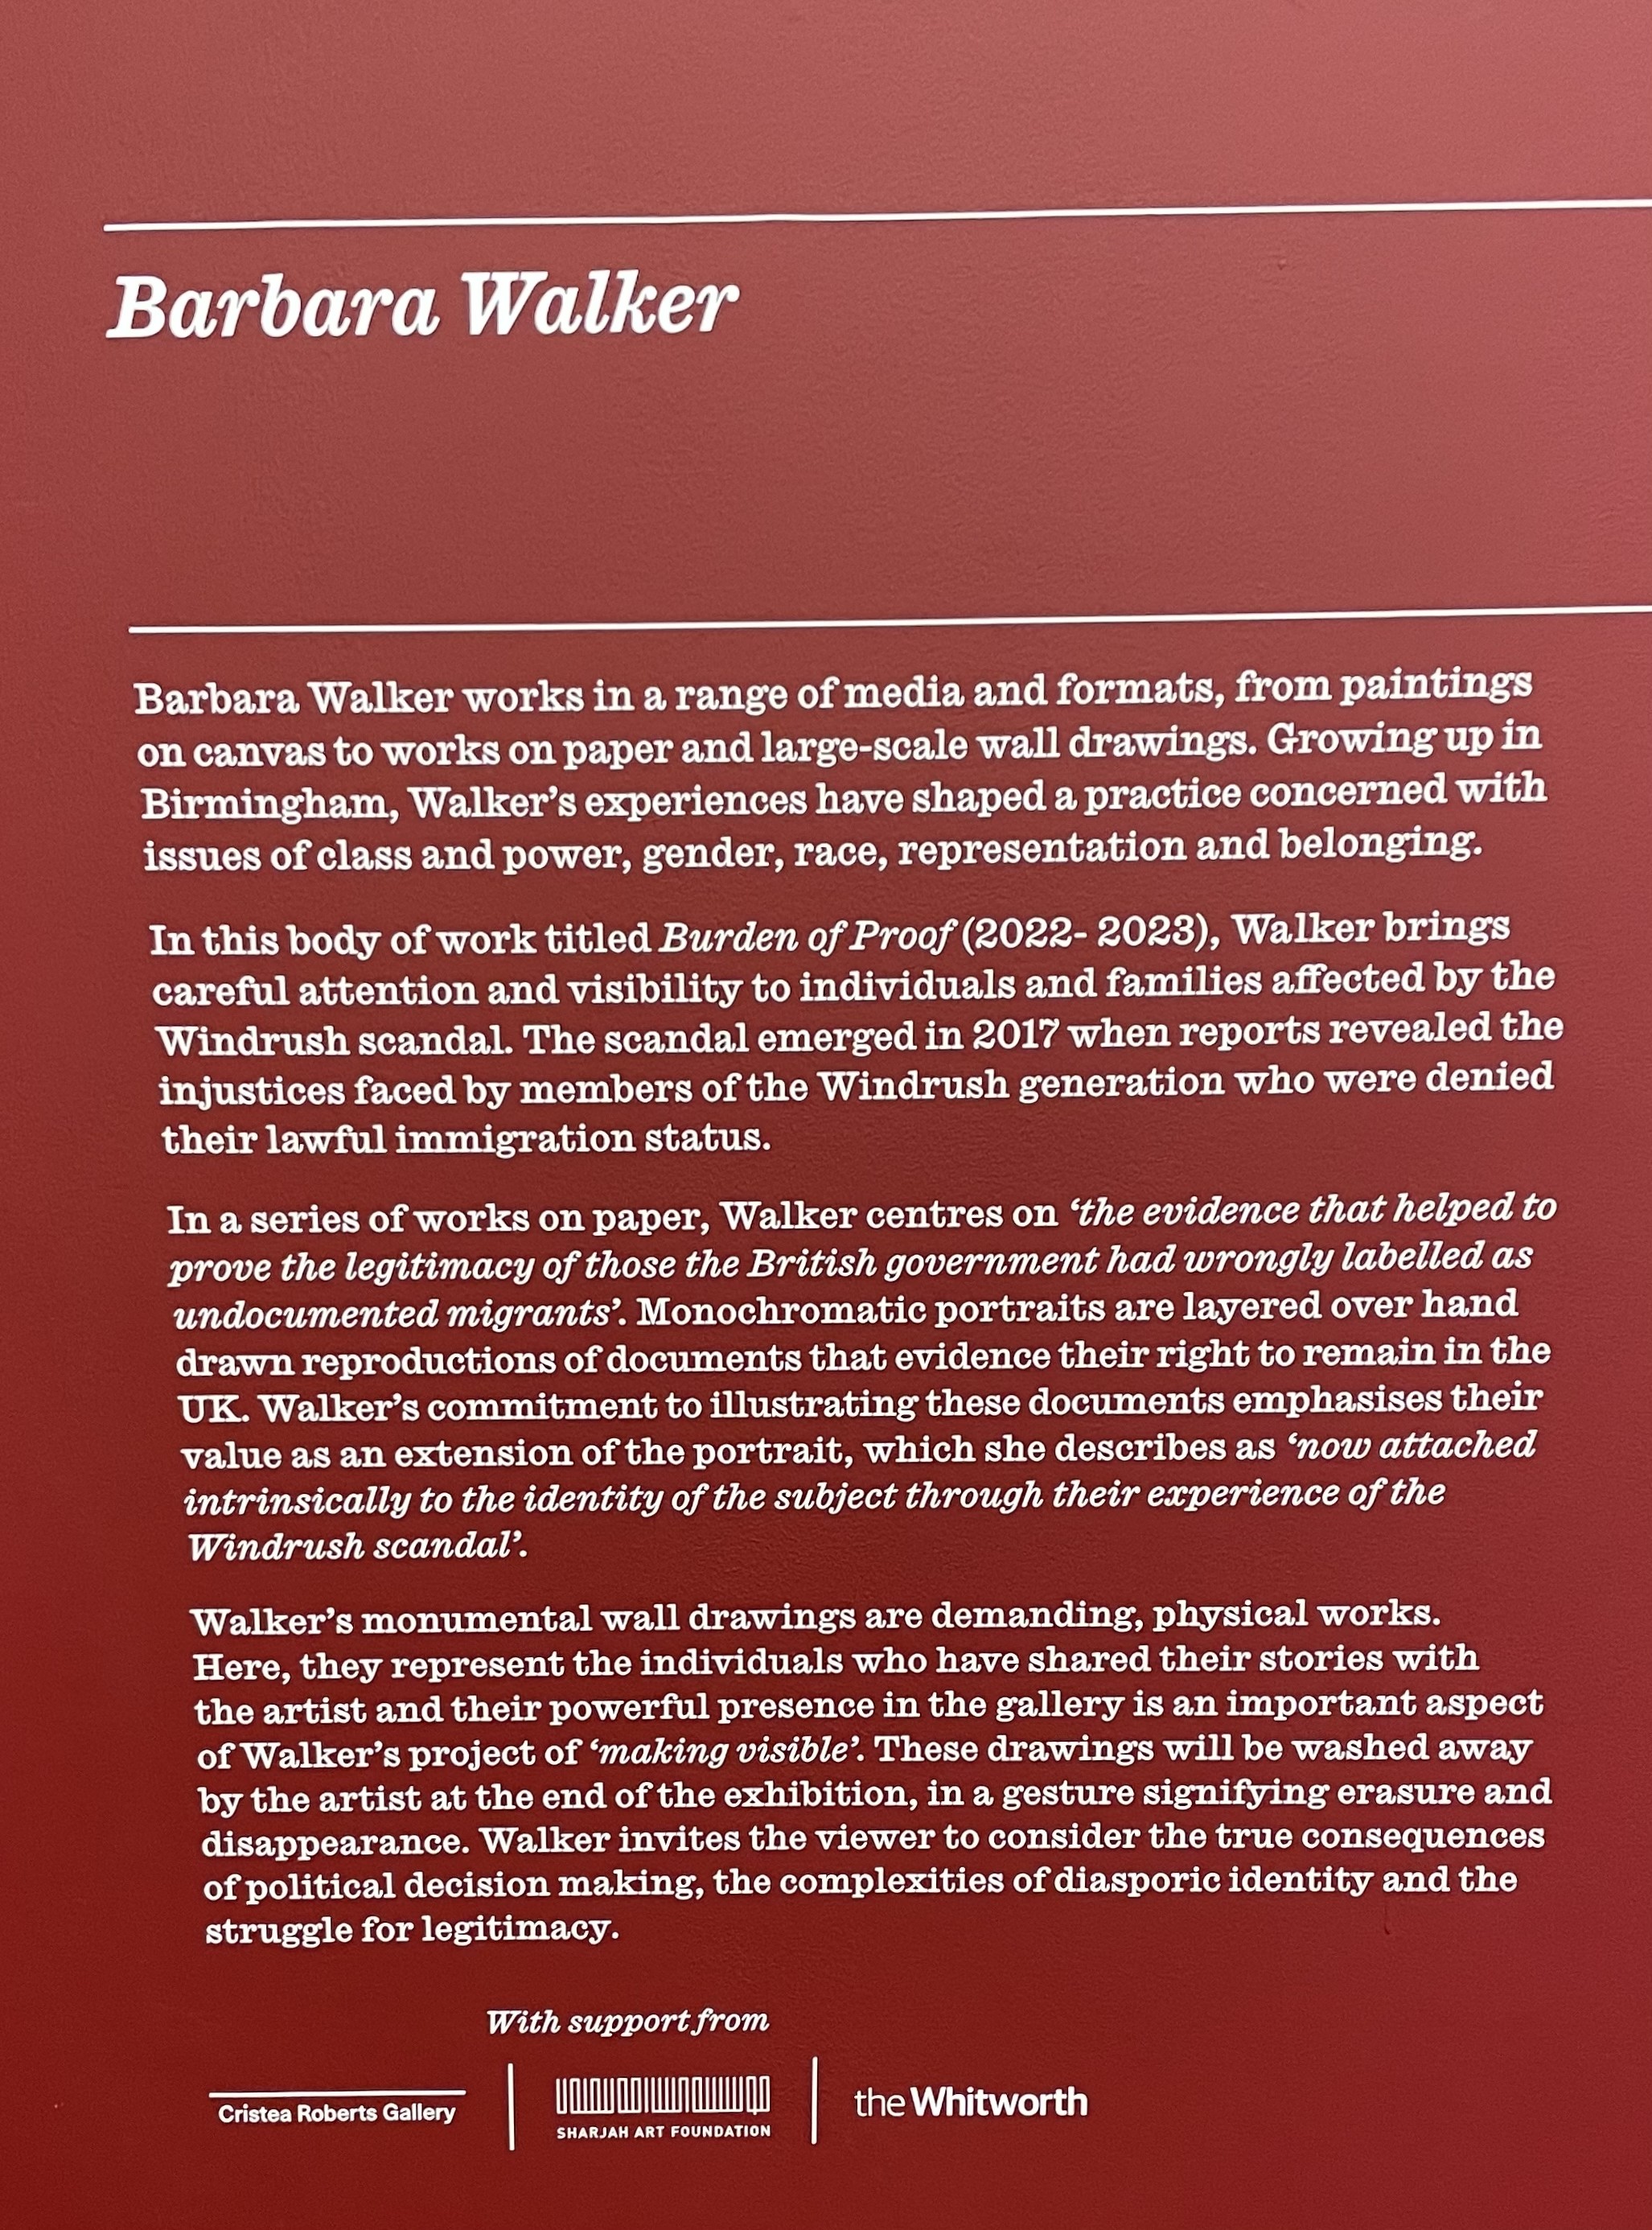 Text about the artist:Barbara WalkerBarbara Walker works in a range of media and formats, from paintings on canvas to works on paper and large-scale wall drawings. Growing up in Birmingham, Walker’s experiences have shaped a practice concerned with issues of class and power, gender, race, representation and belonging.In this body of work titled Burden of Proof (2022- 2023), Walker brings careful attention and visibility to individuals and families affected by the Windrush scandal.